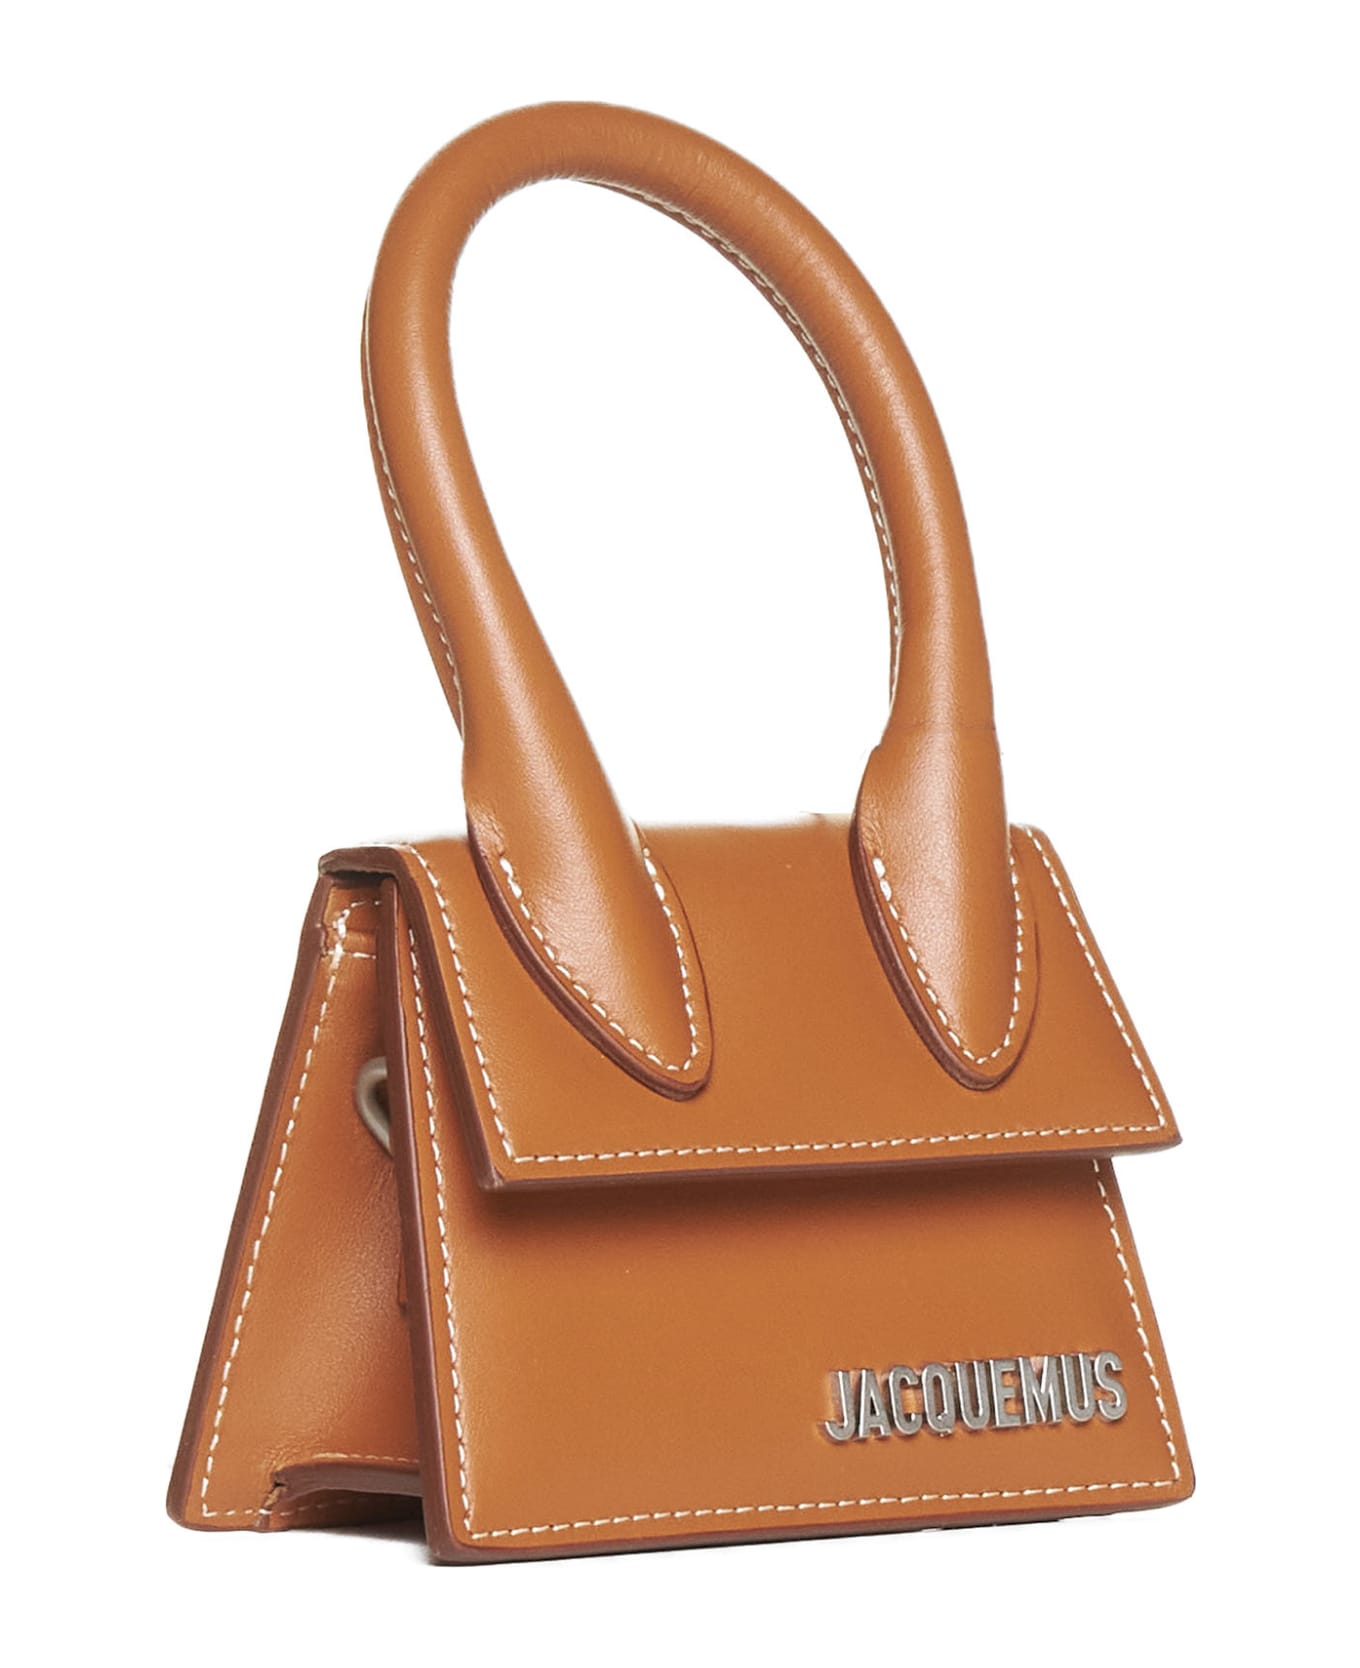 Jacquemus Le Chiquito Homme Bag - Light brown 2 トートバッグ